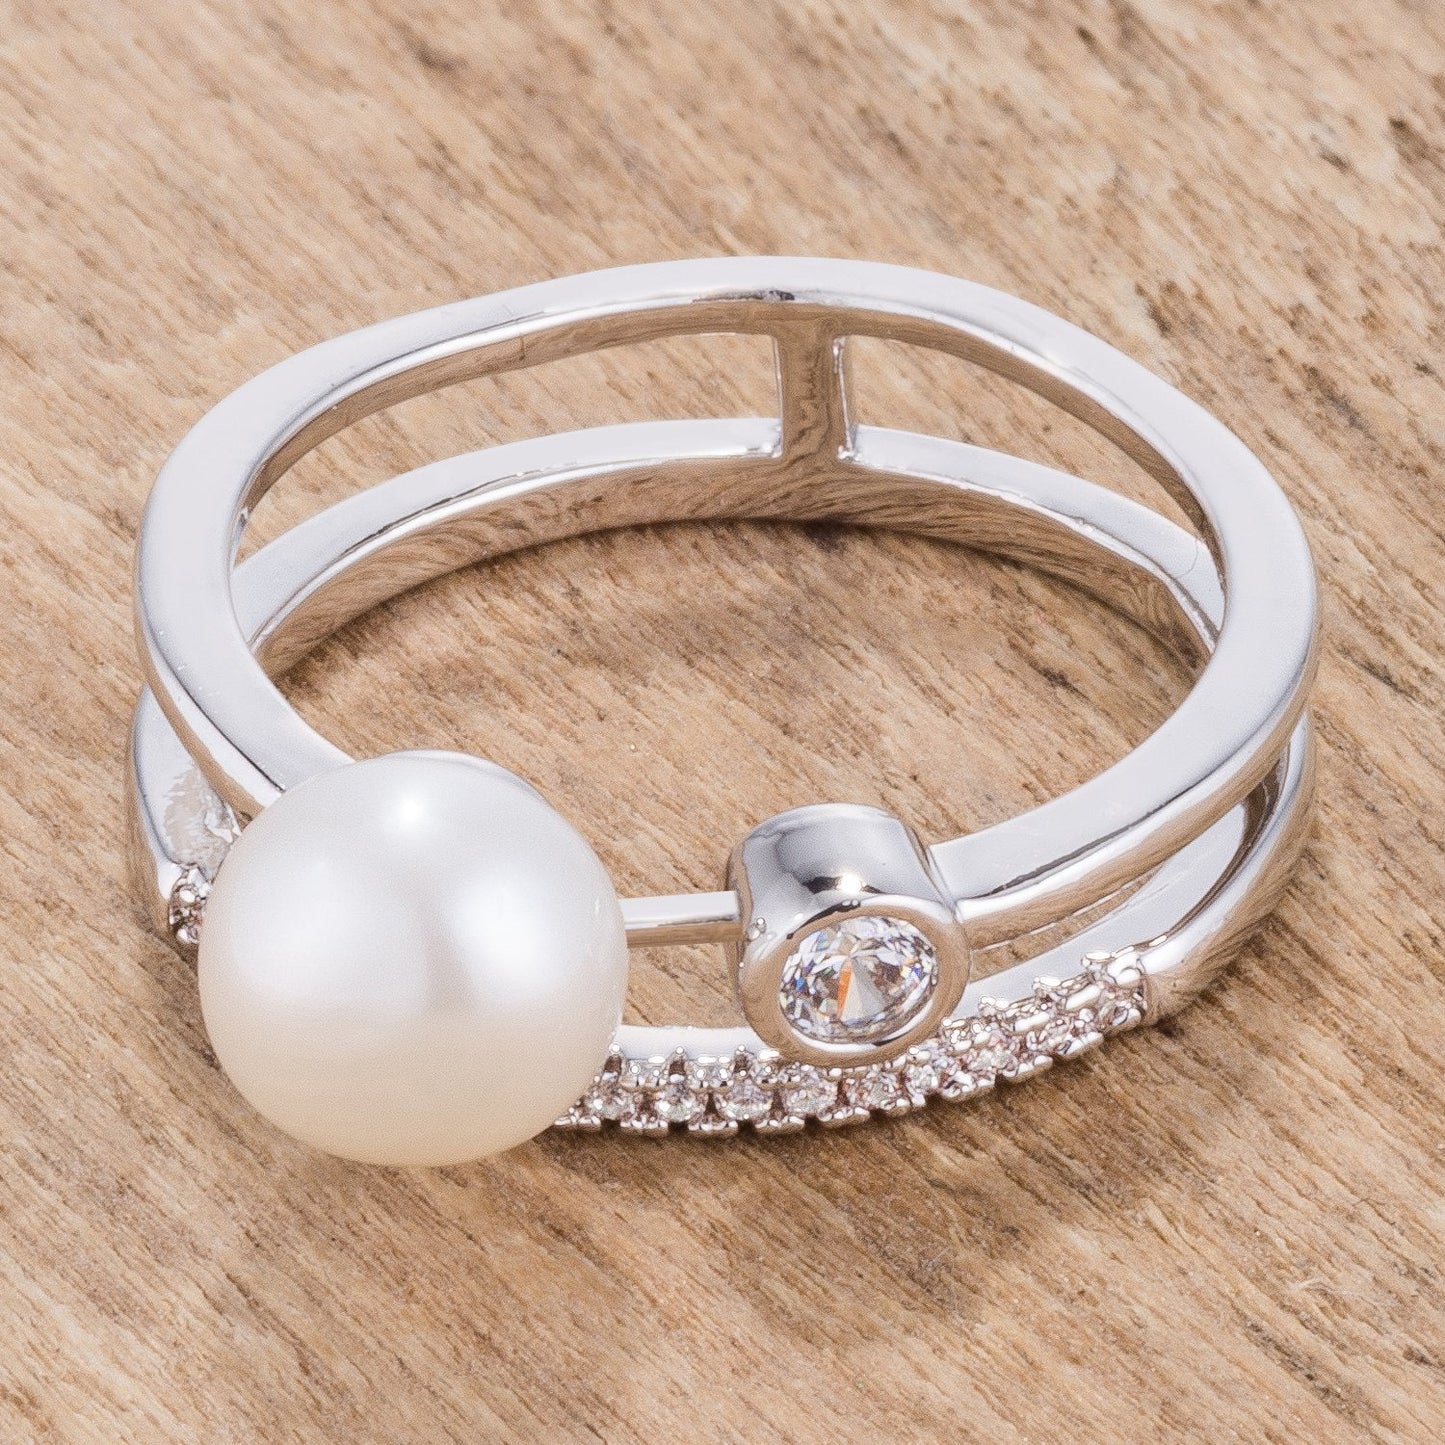 Astral Vision Pearl Ring